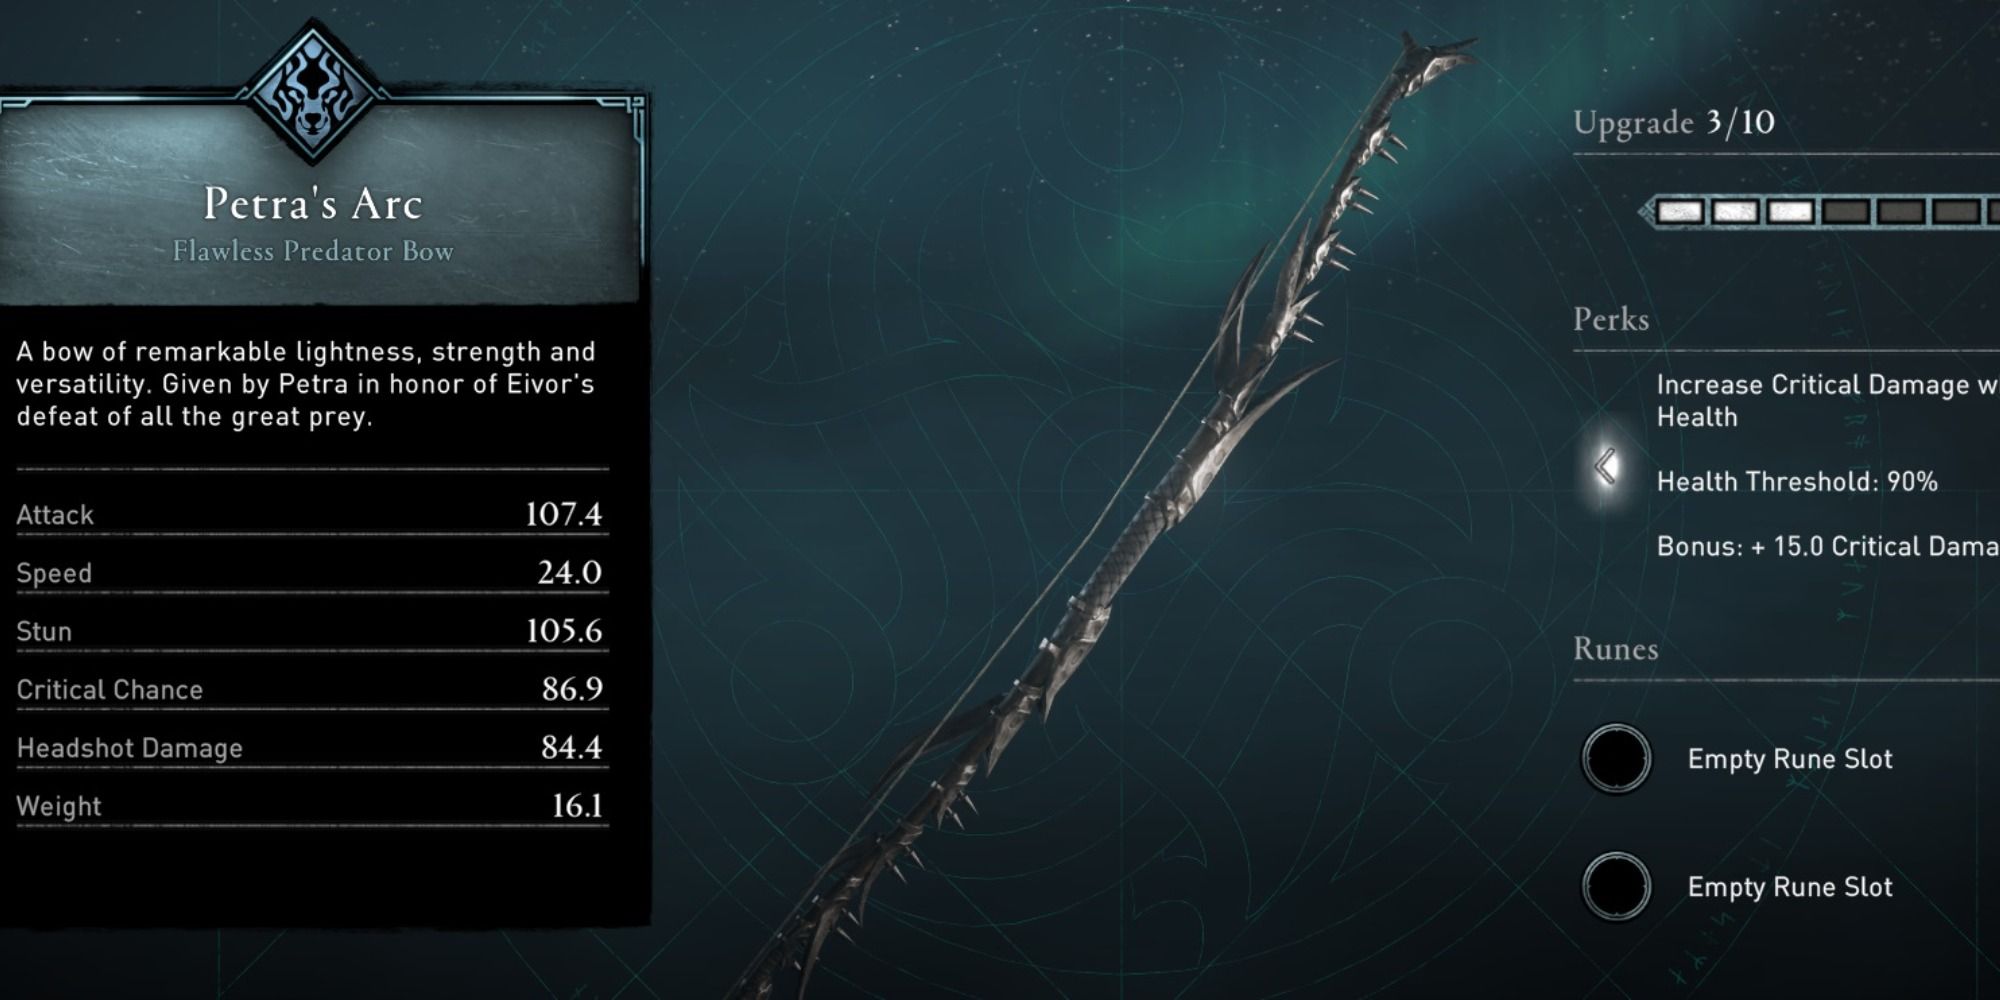 An image of Petras arc and its stats in Assassins Creed Valhalla